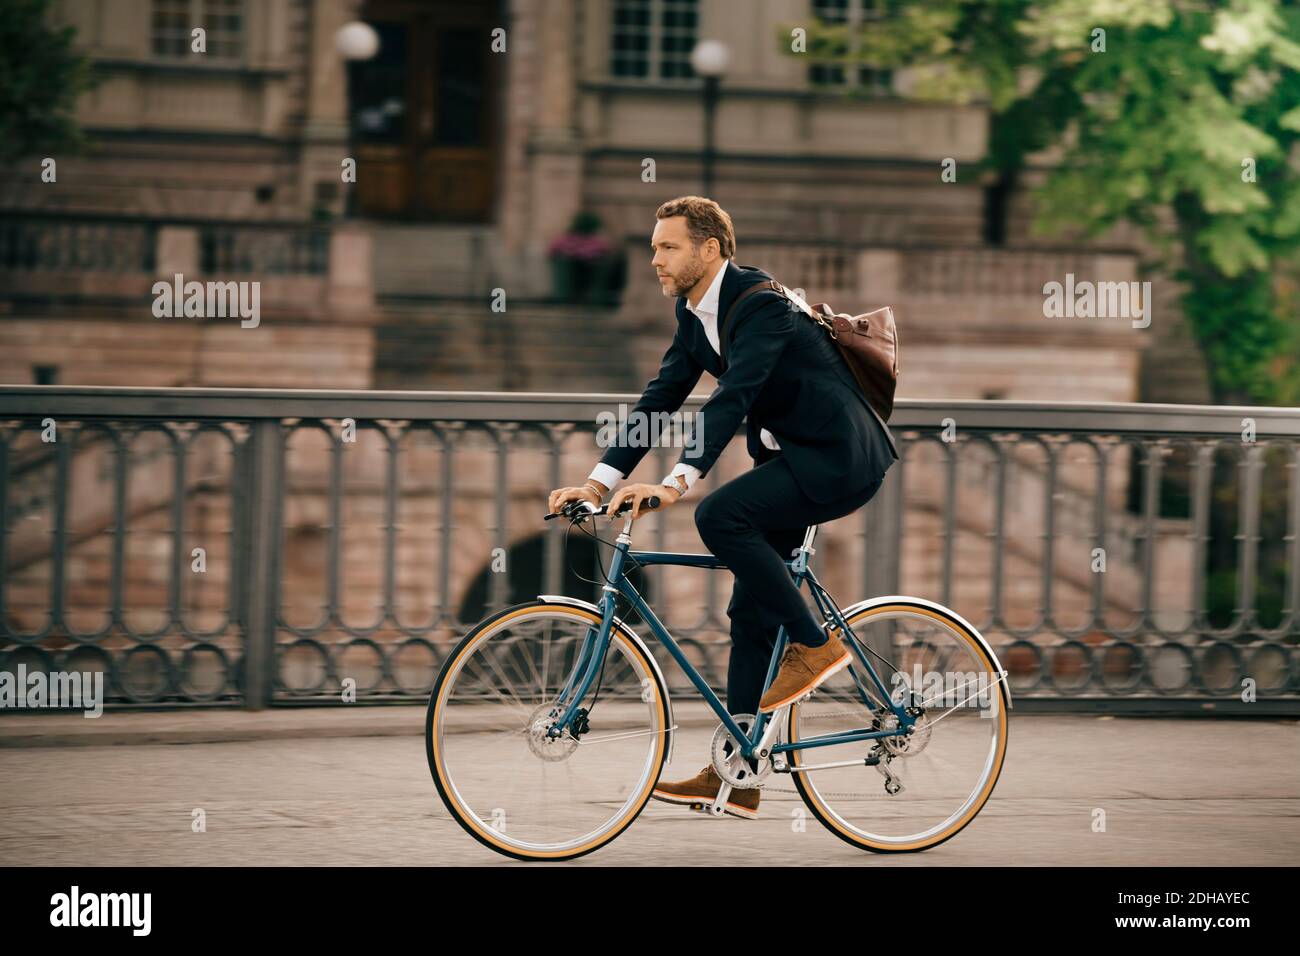 Full length of businessman cycling on street in city Stock Photo